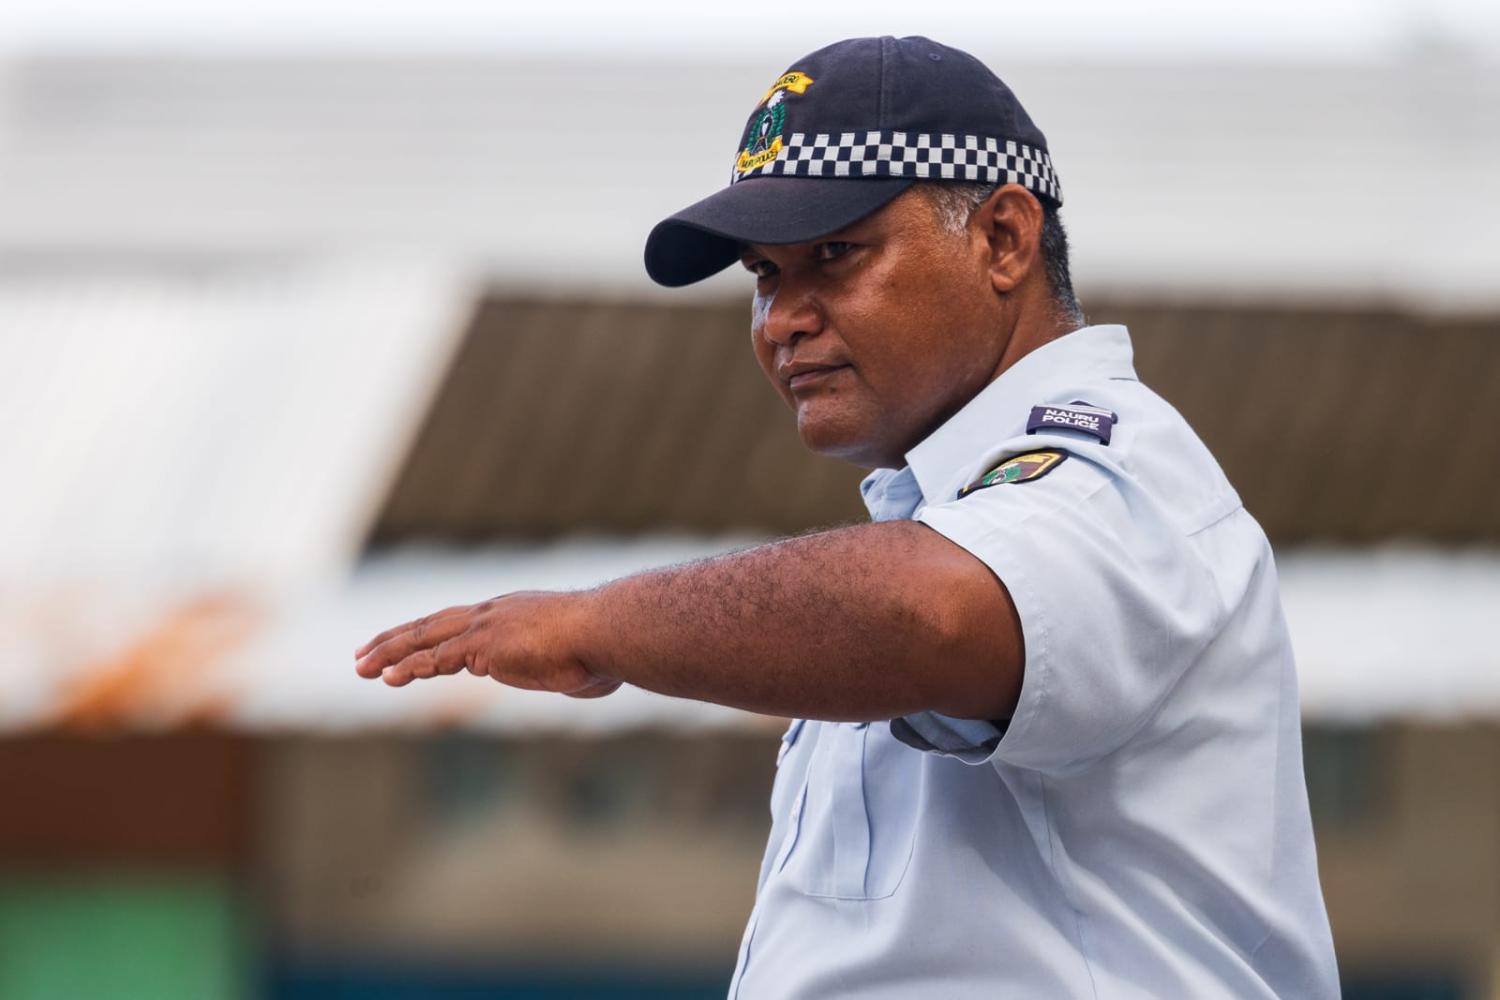 Regional police organisations face constraints to release officers for extended training periods (Sam Price/Defence Department)